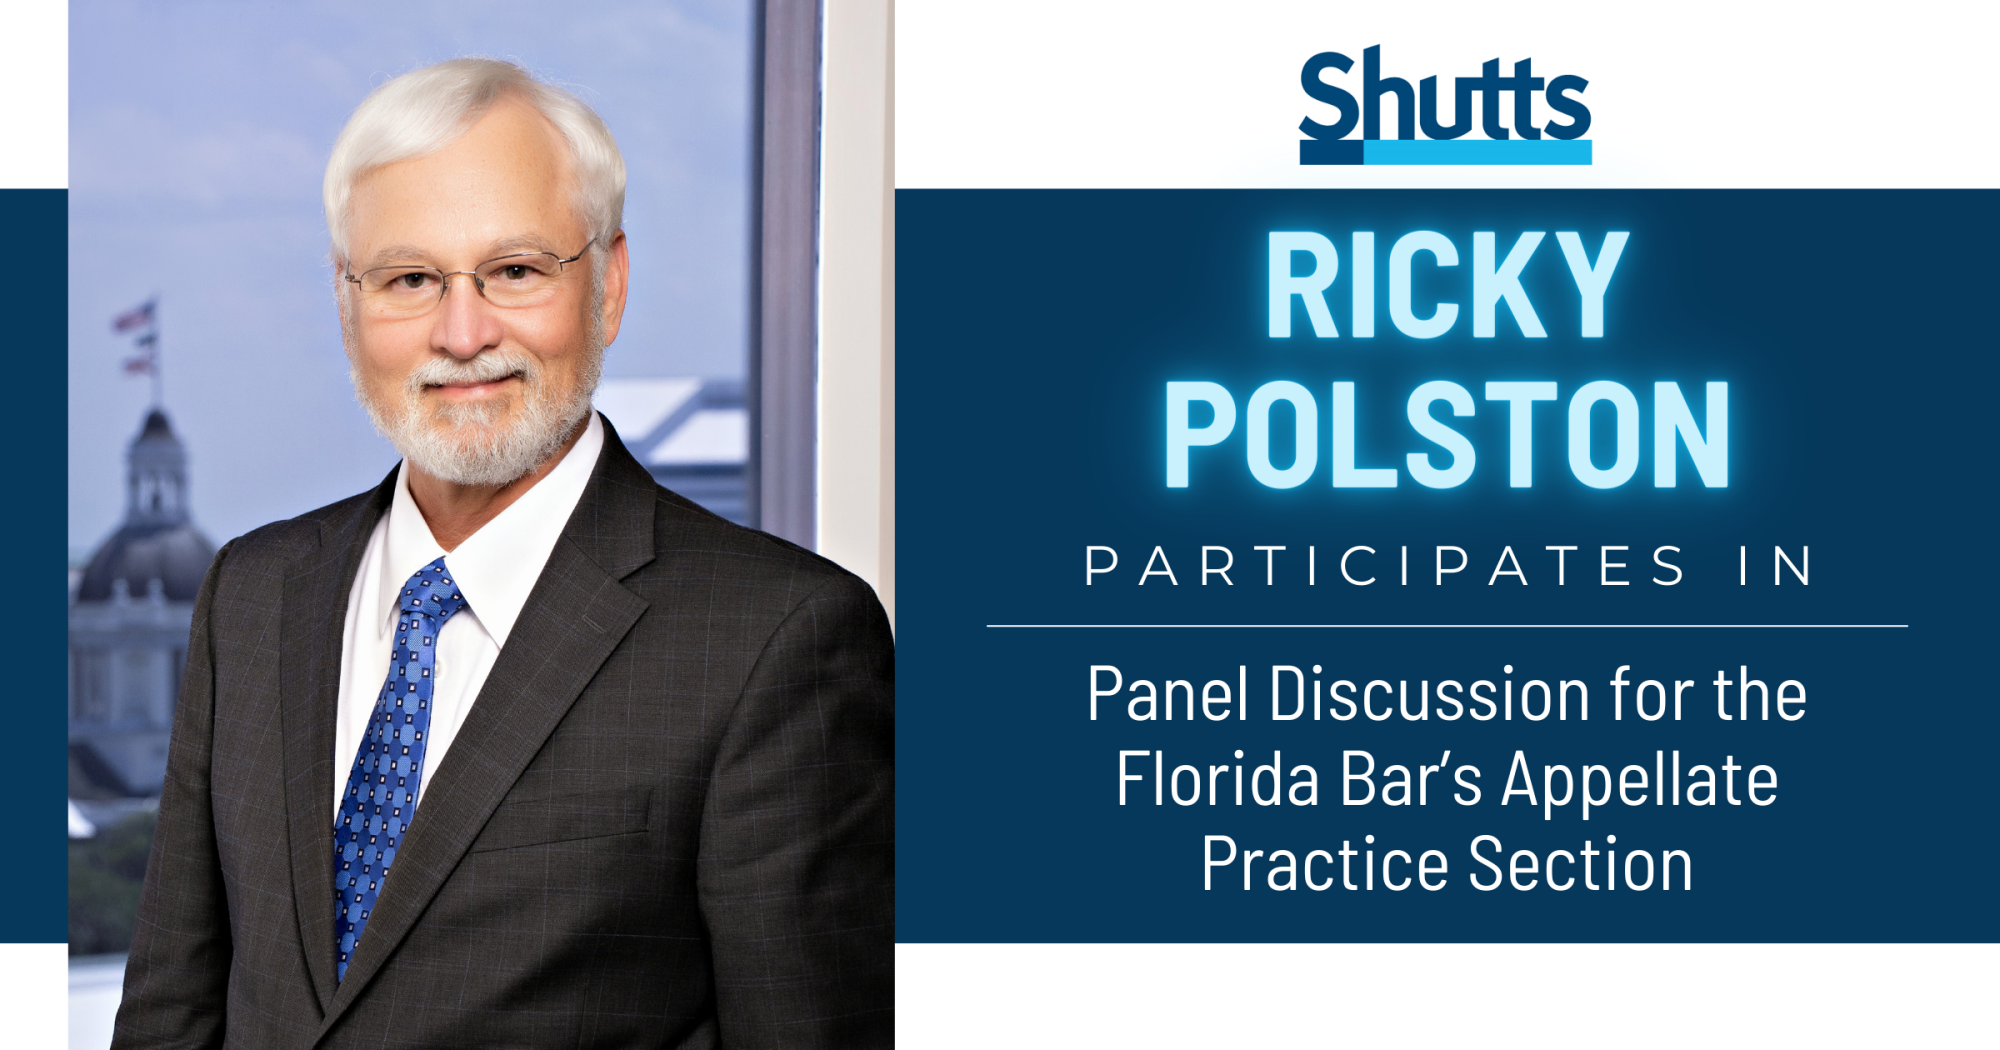 Ricky Polston Participates in Panel Discussion for the Florida Bar’s Appellate Practice Section